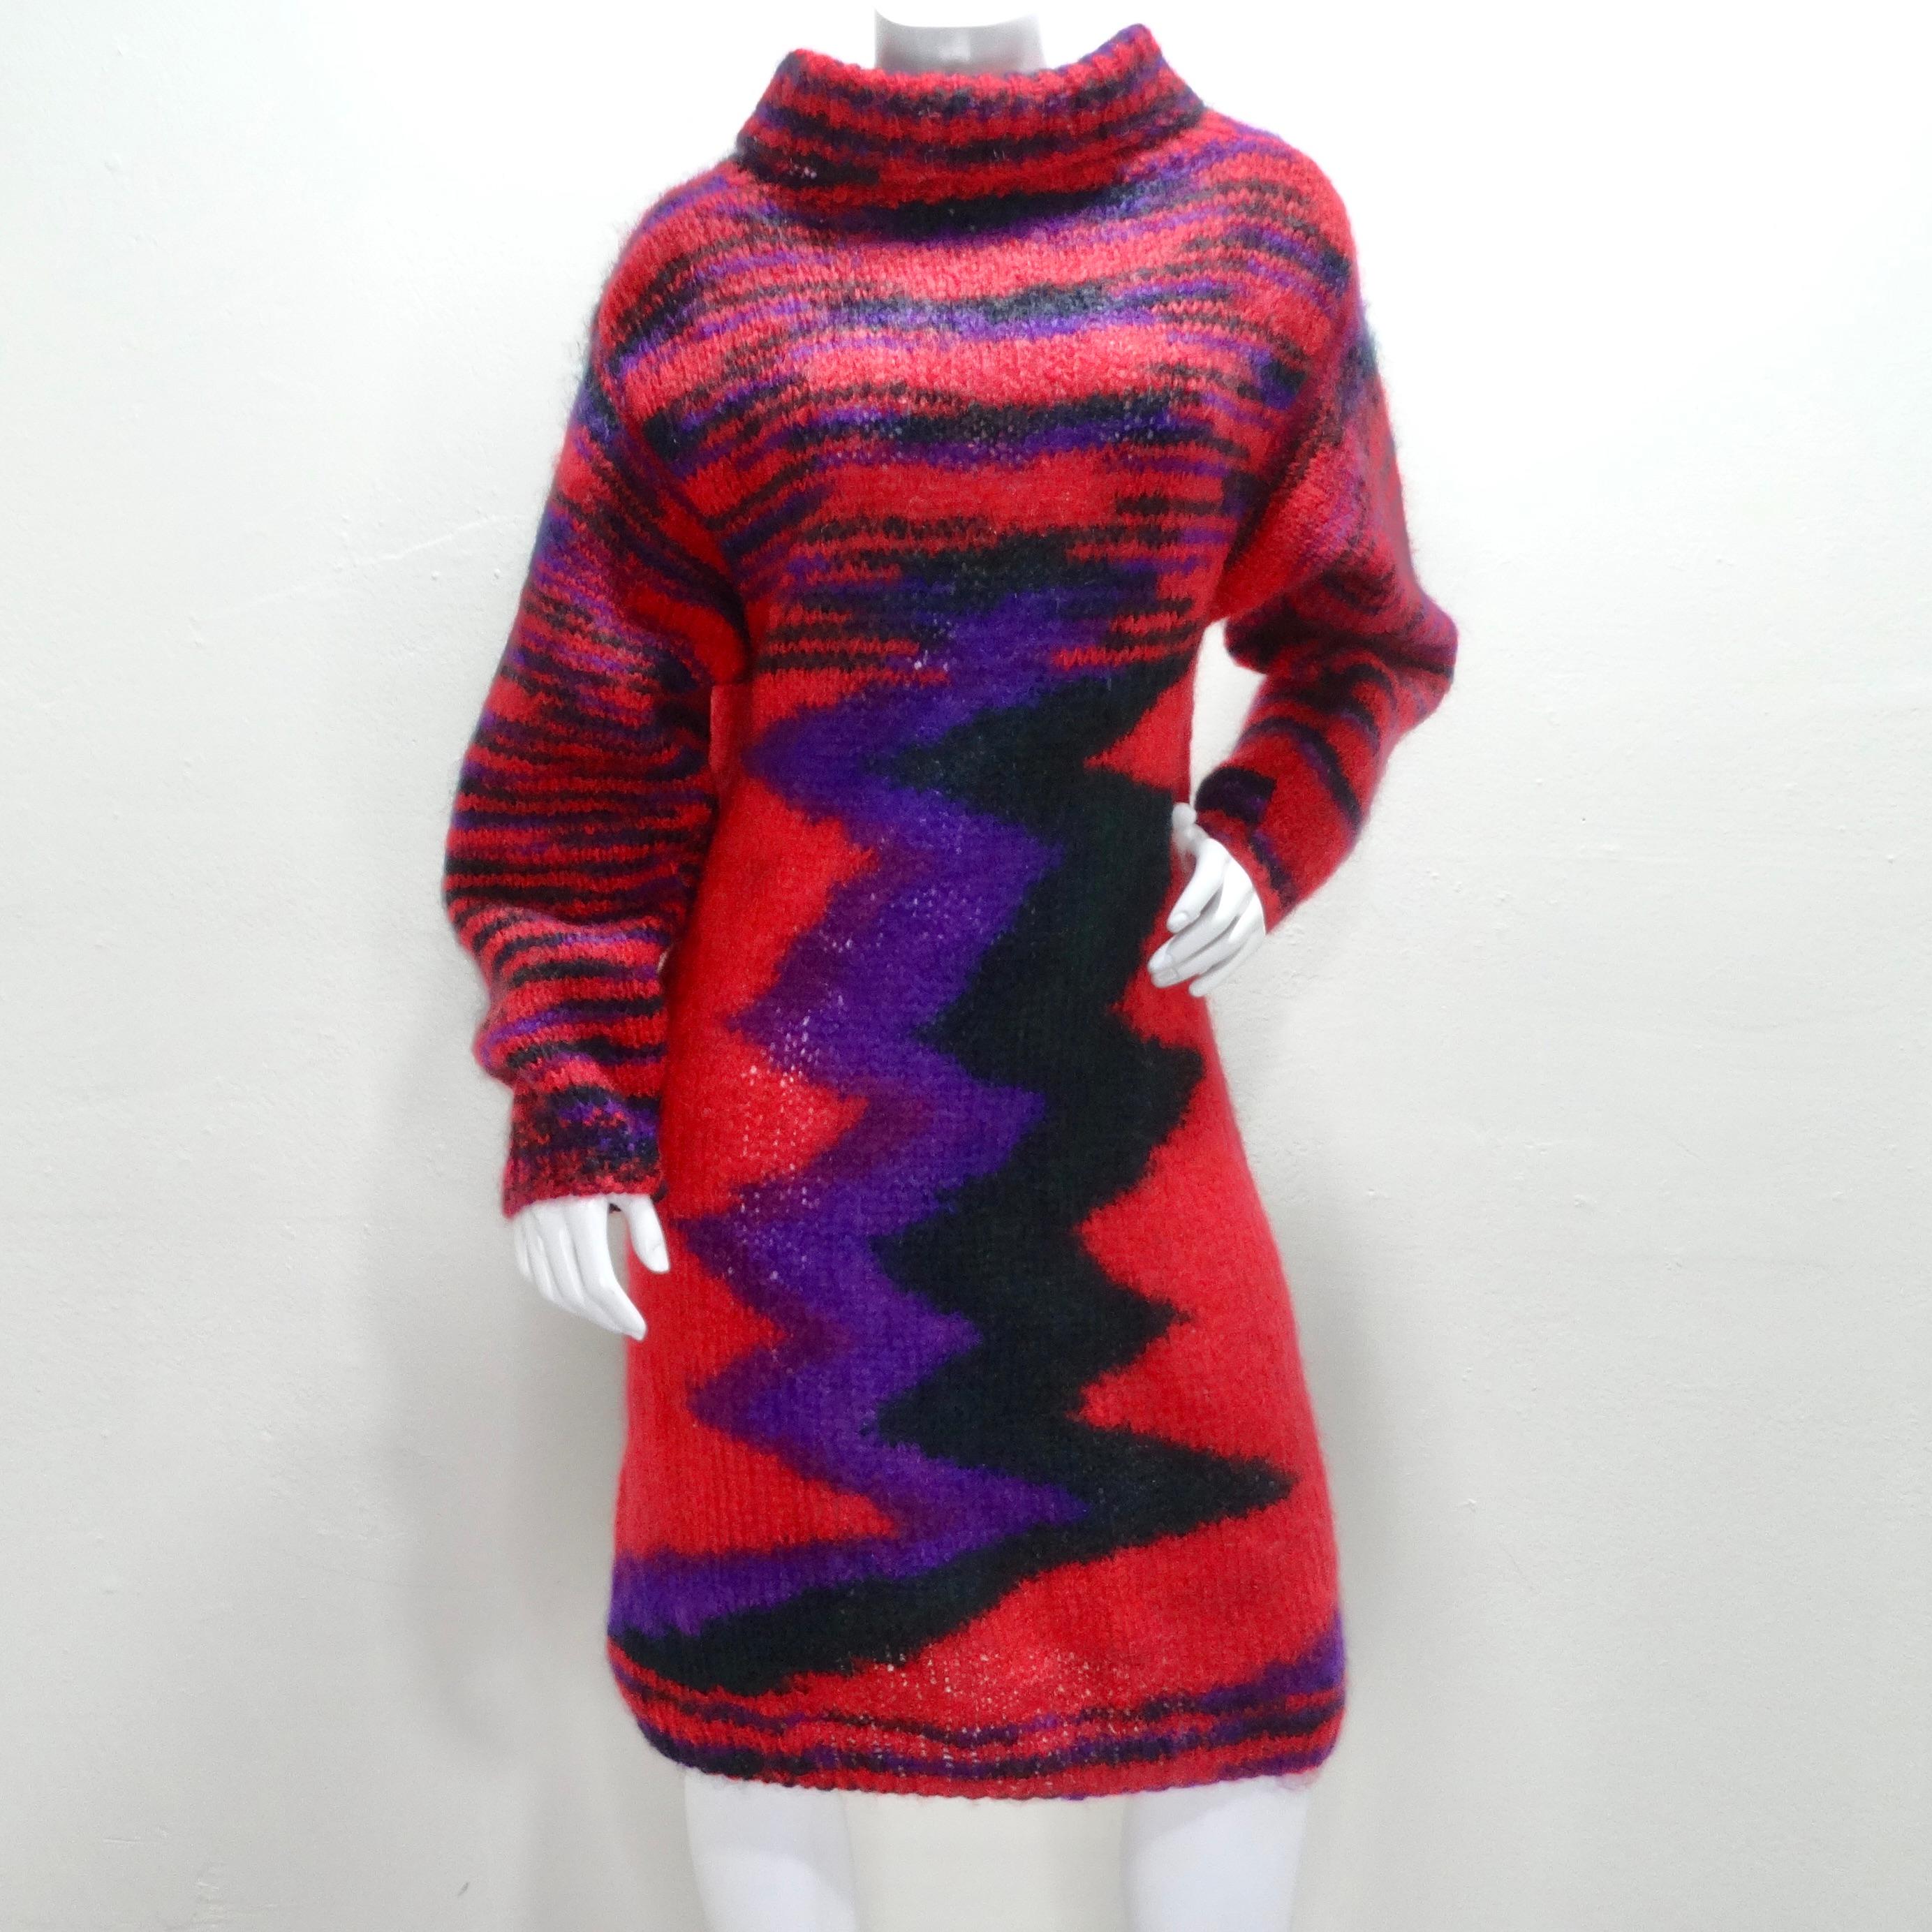 Introducing this striking 1980s Hand-Knit Multicolor Sweater Dress, a true gem that captures the essence of the vibrant and expressive 1980s fashion era. The 1980s were all about bold, expressive fashion, and this sweater dress pays homage to that